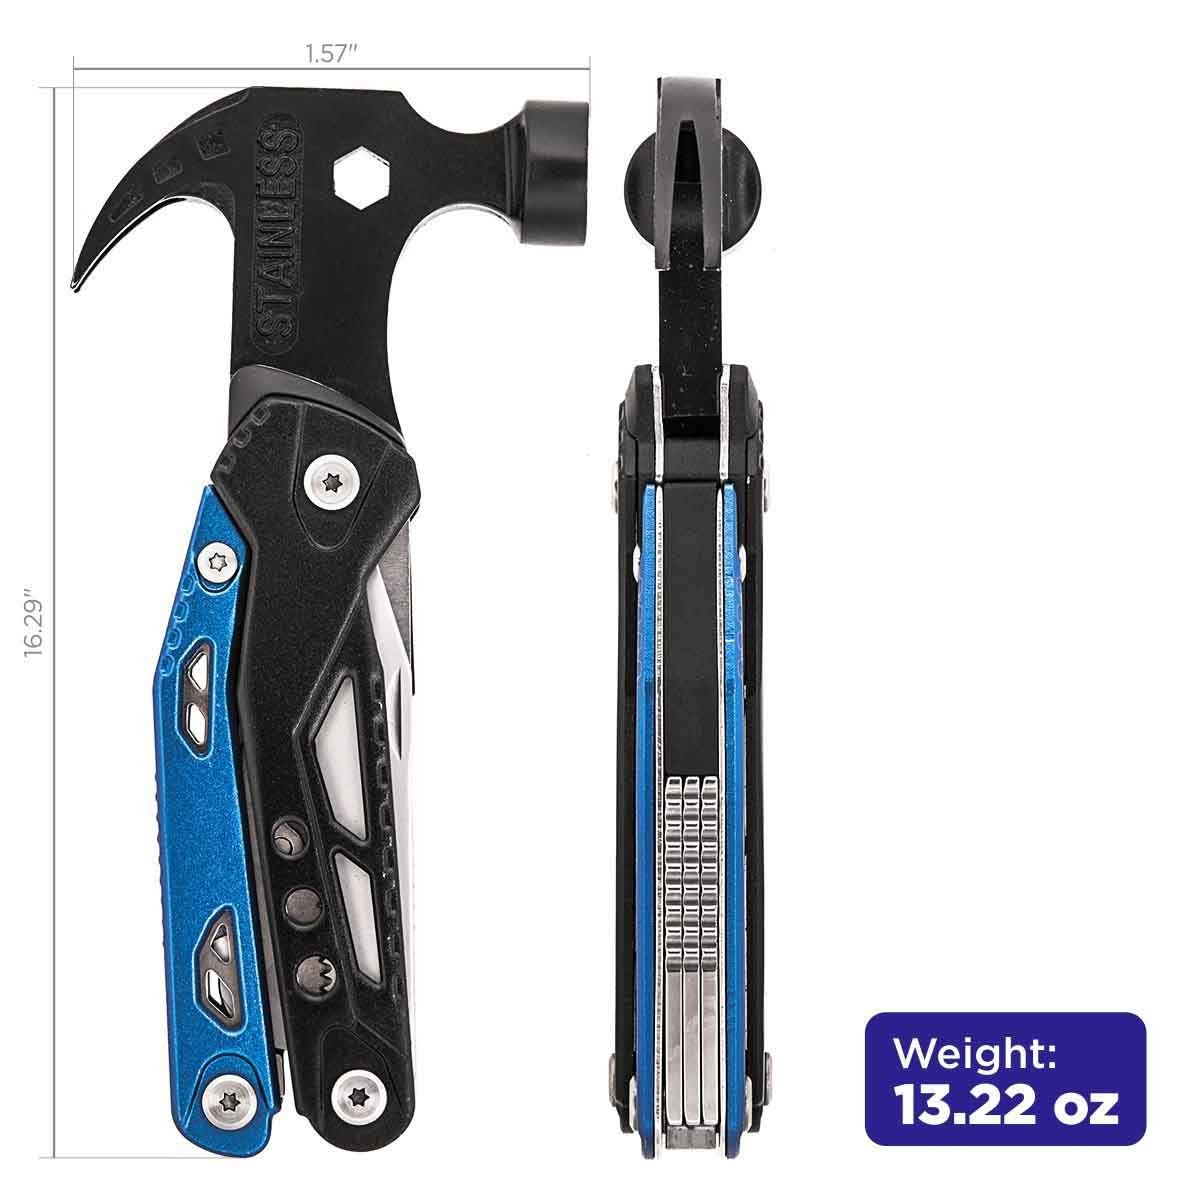  Portable 7-in-1 Hammer Multitool fore Home and Outdoor is 16.29 inches long, 1.57 inches wide and weighs 13.22 oz